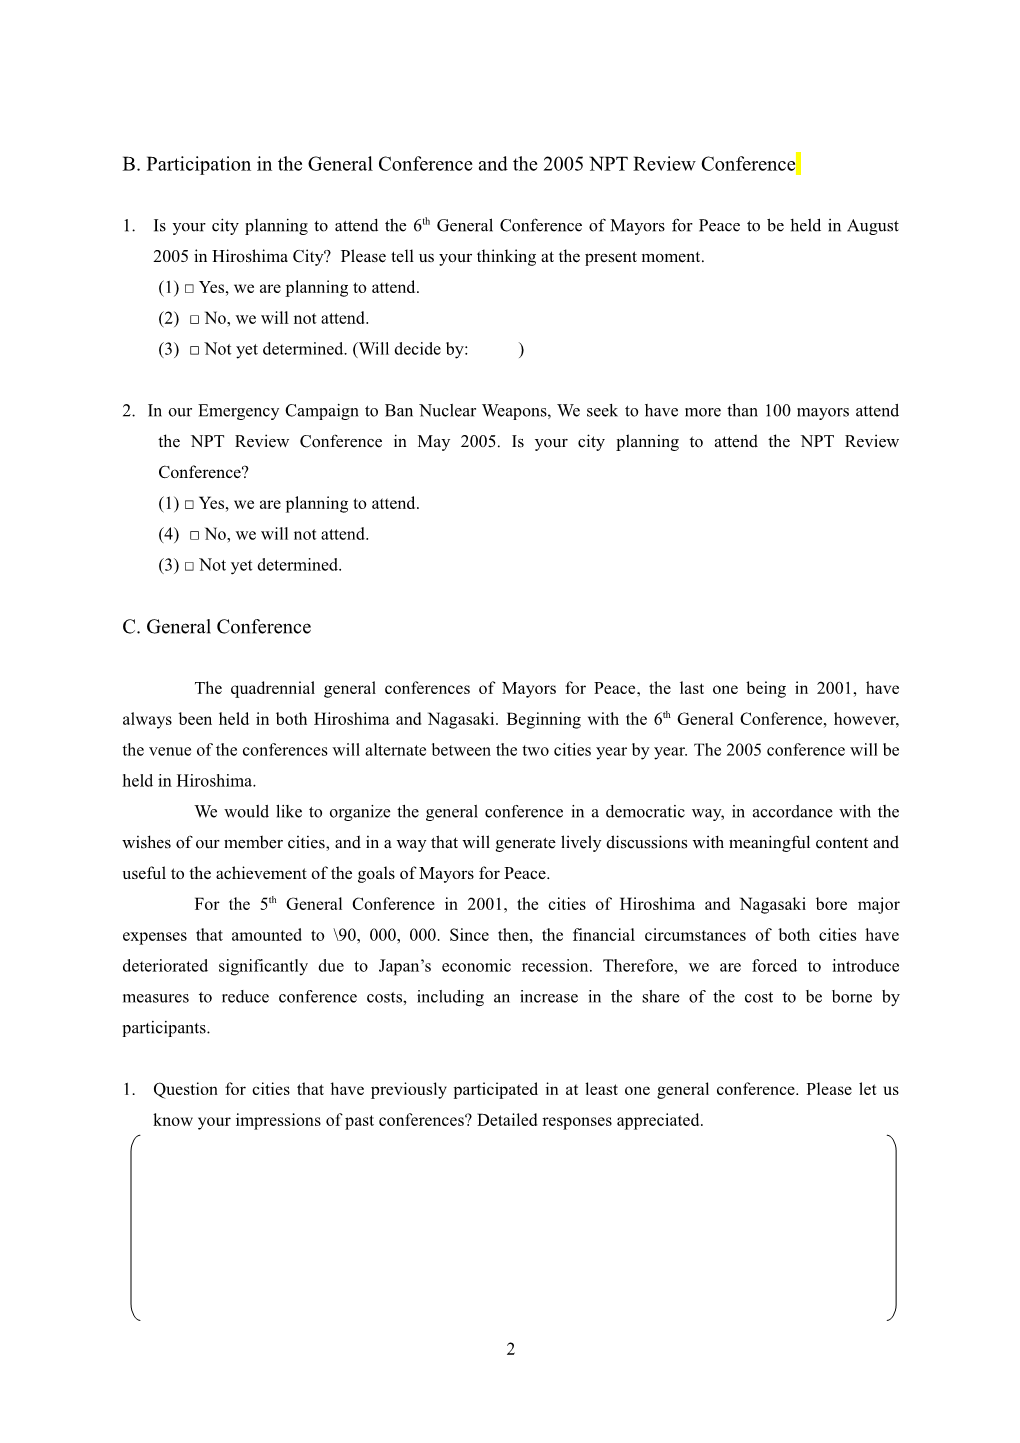 Questionnaire for the 6Th General Conference of Mayors for Peace